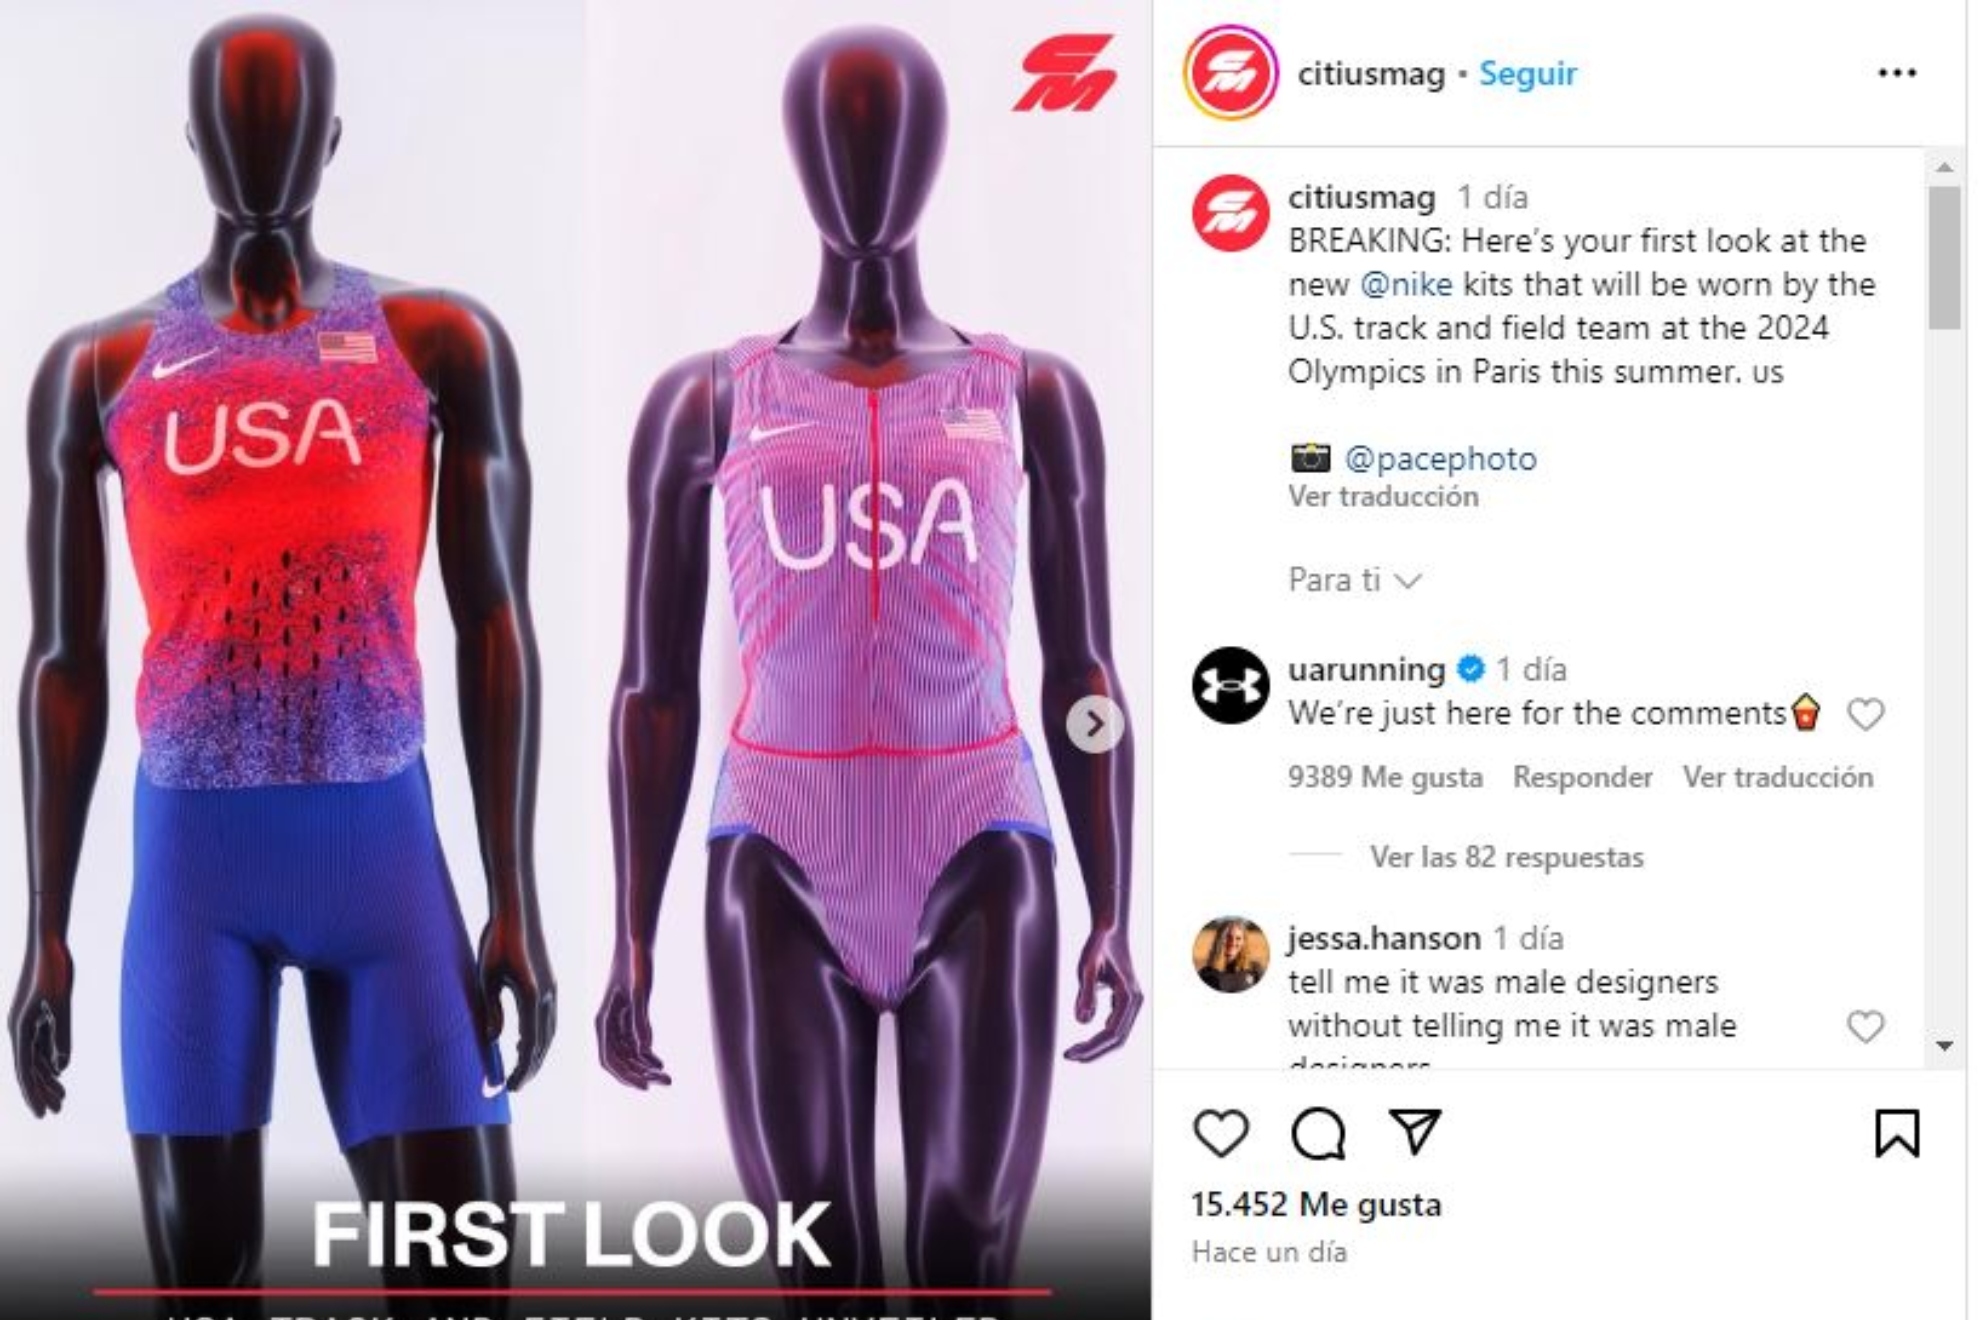 The US athletics outfits